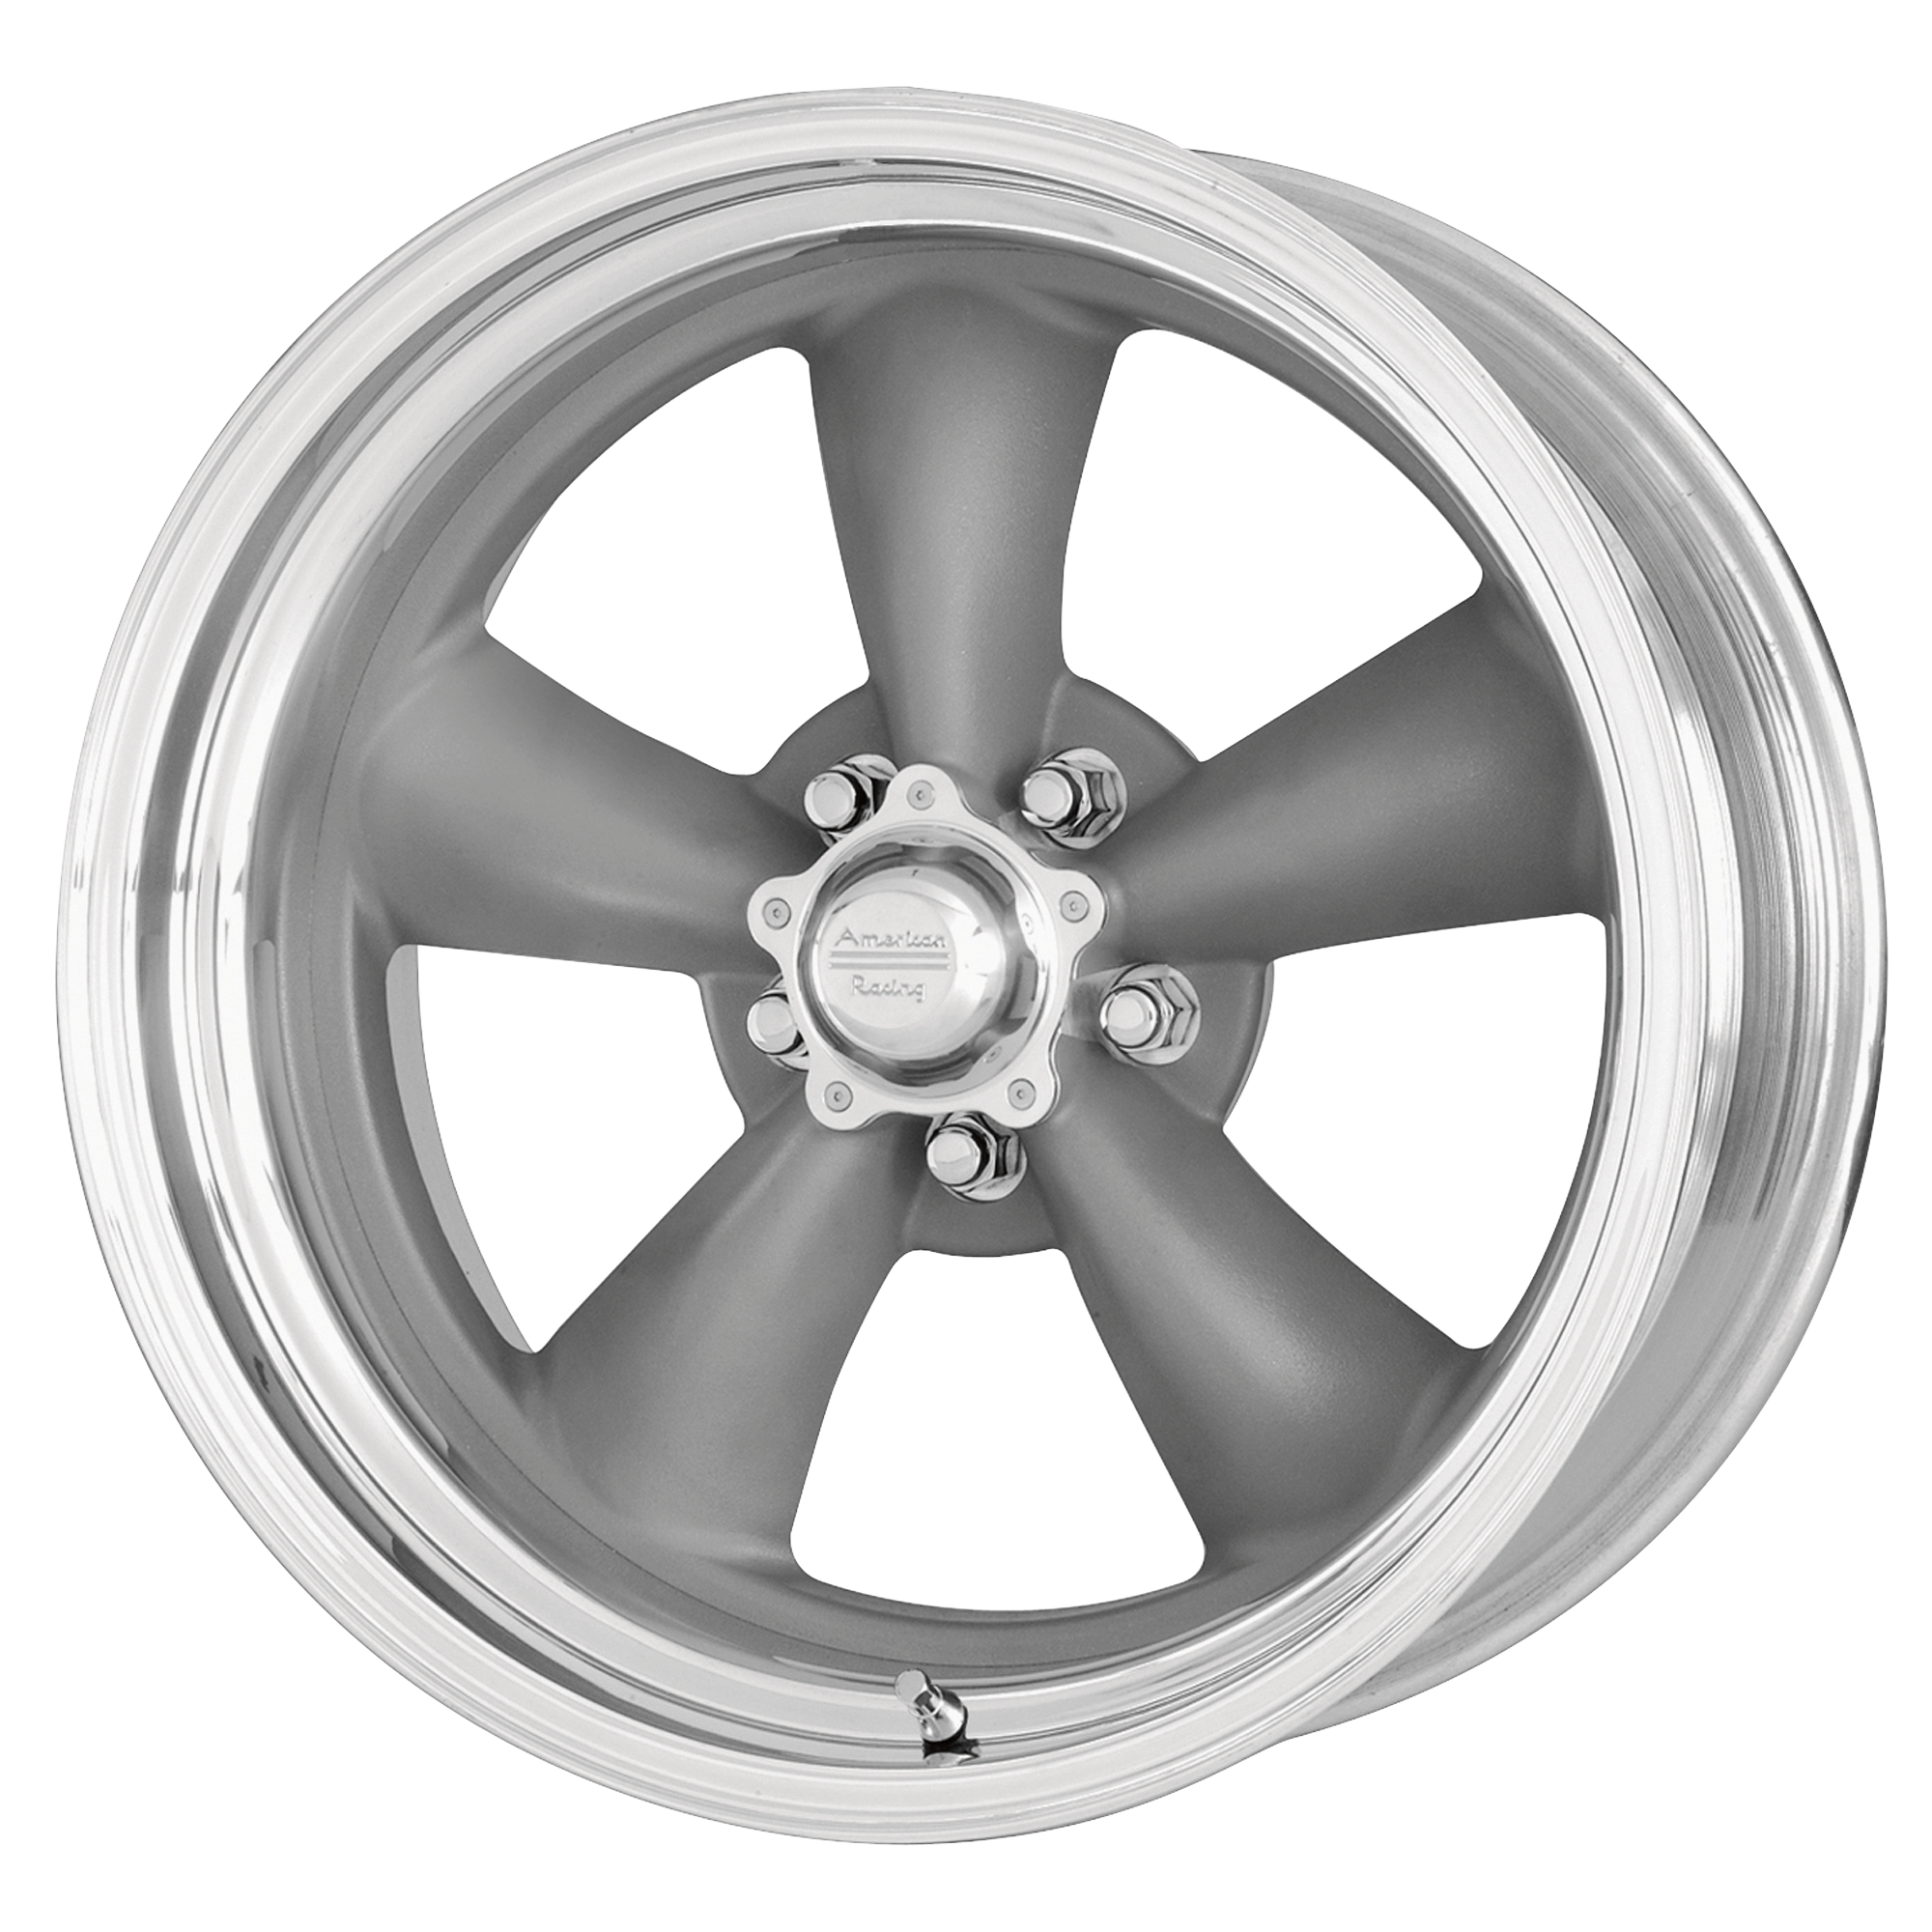 CLASSIC TORQ THRUST II ONE PIECE 16x8 5x120.65 MAG GRAY W/ MACHINED LIP (-11 mm) - Tires and Engine Performance